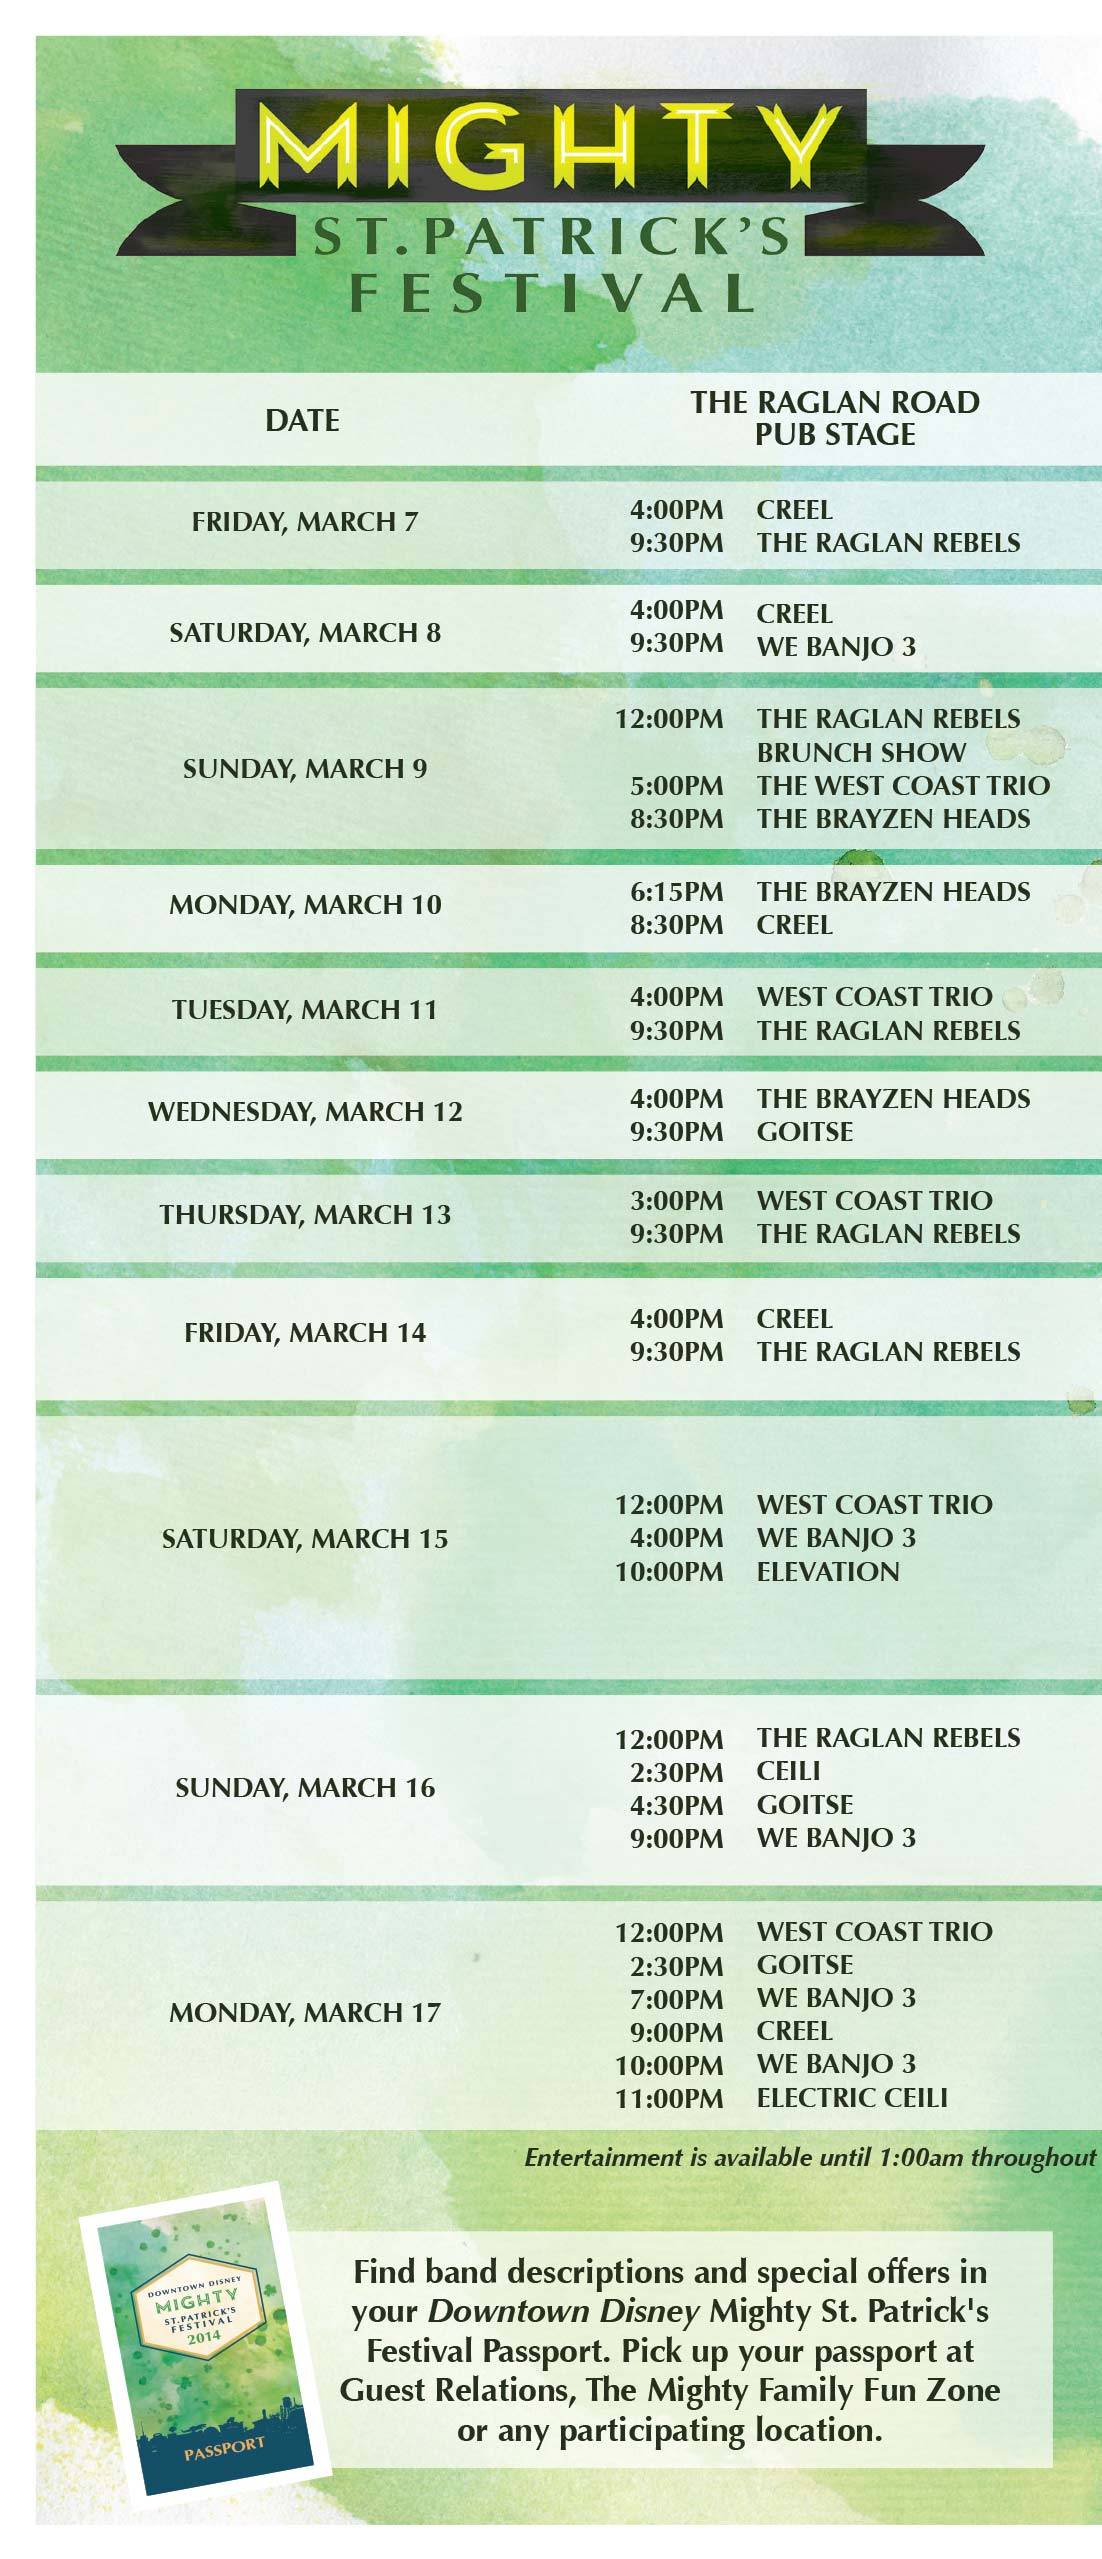 Mighty St. Patrick's Festival times guide